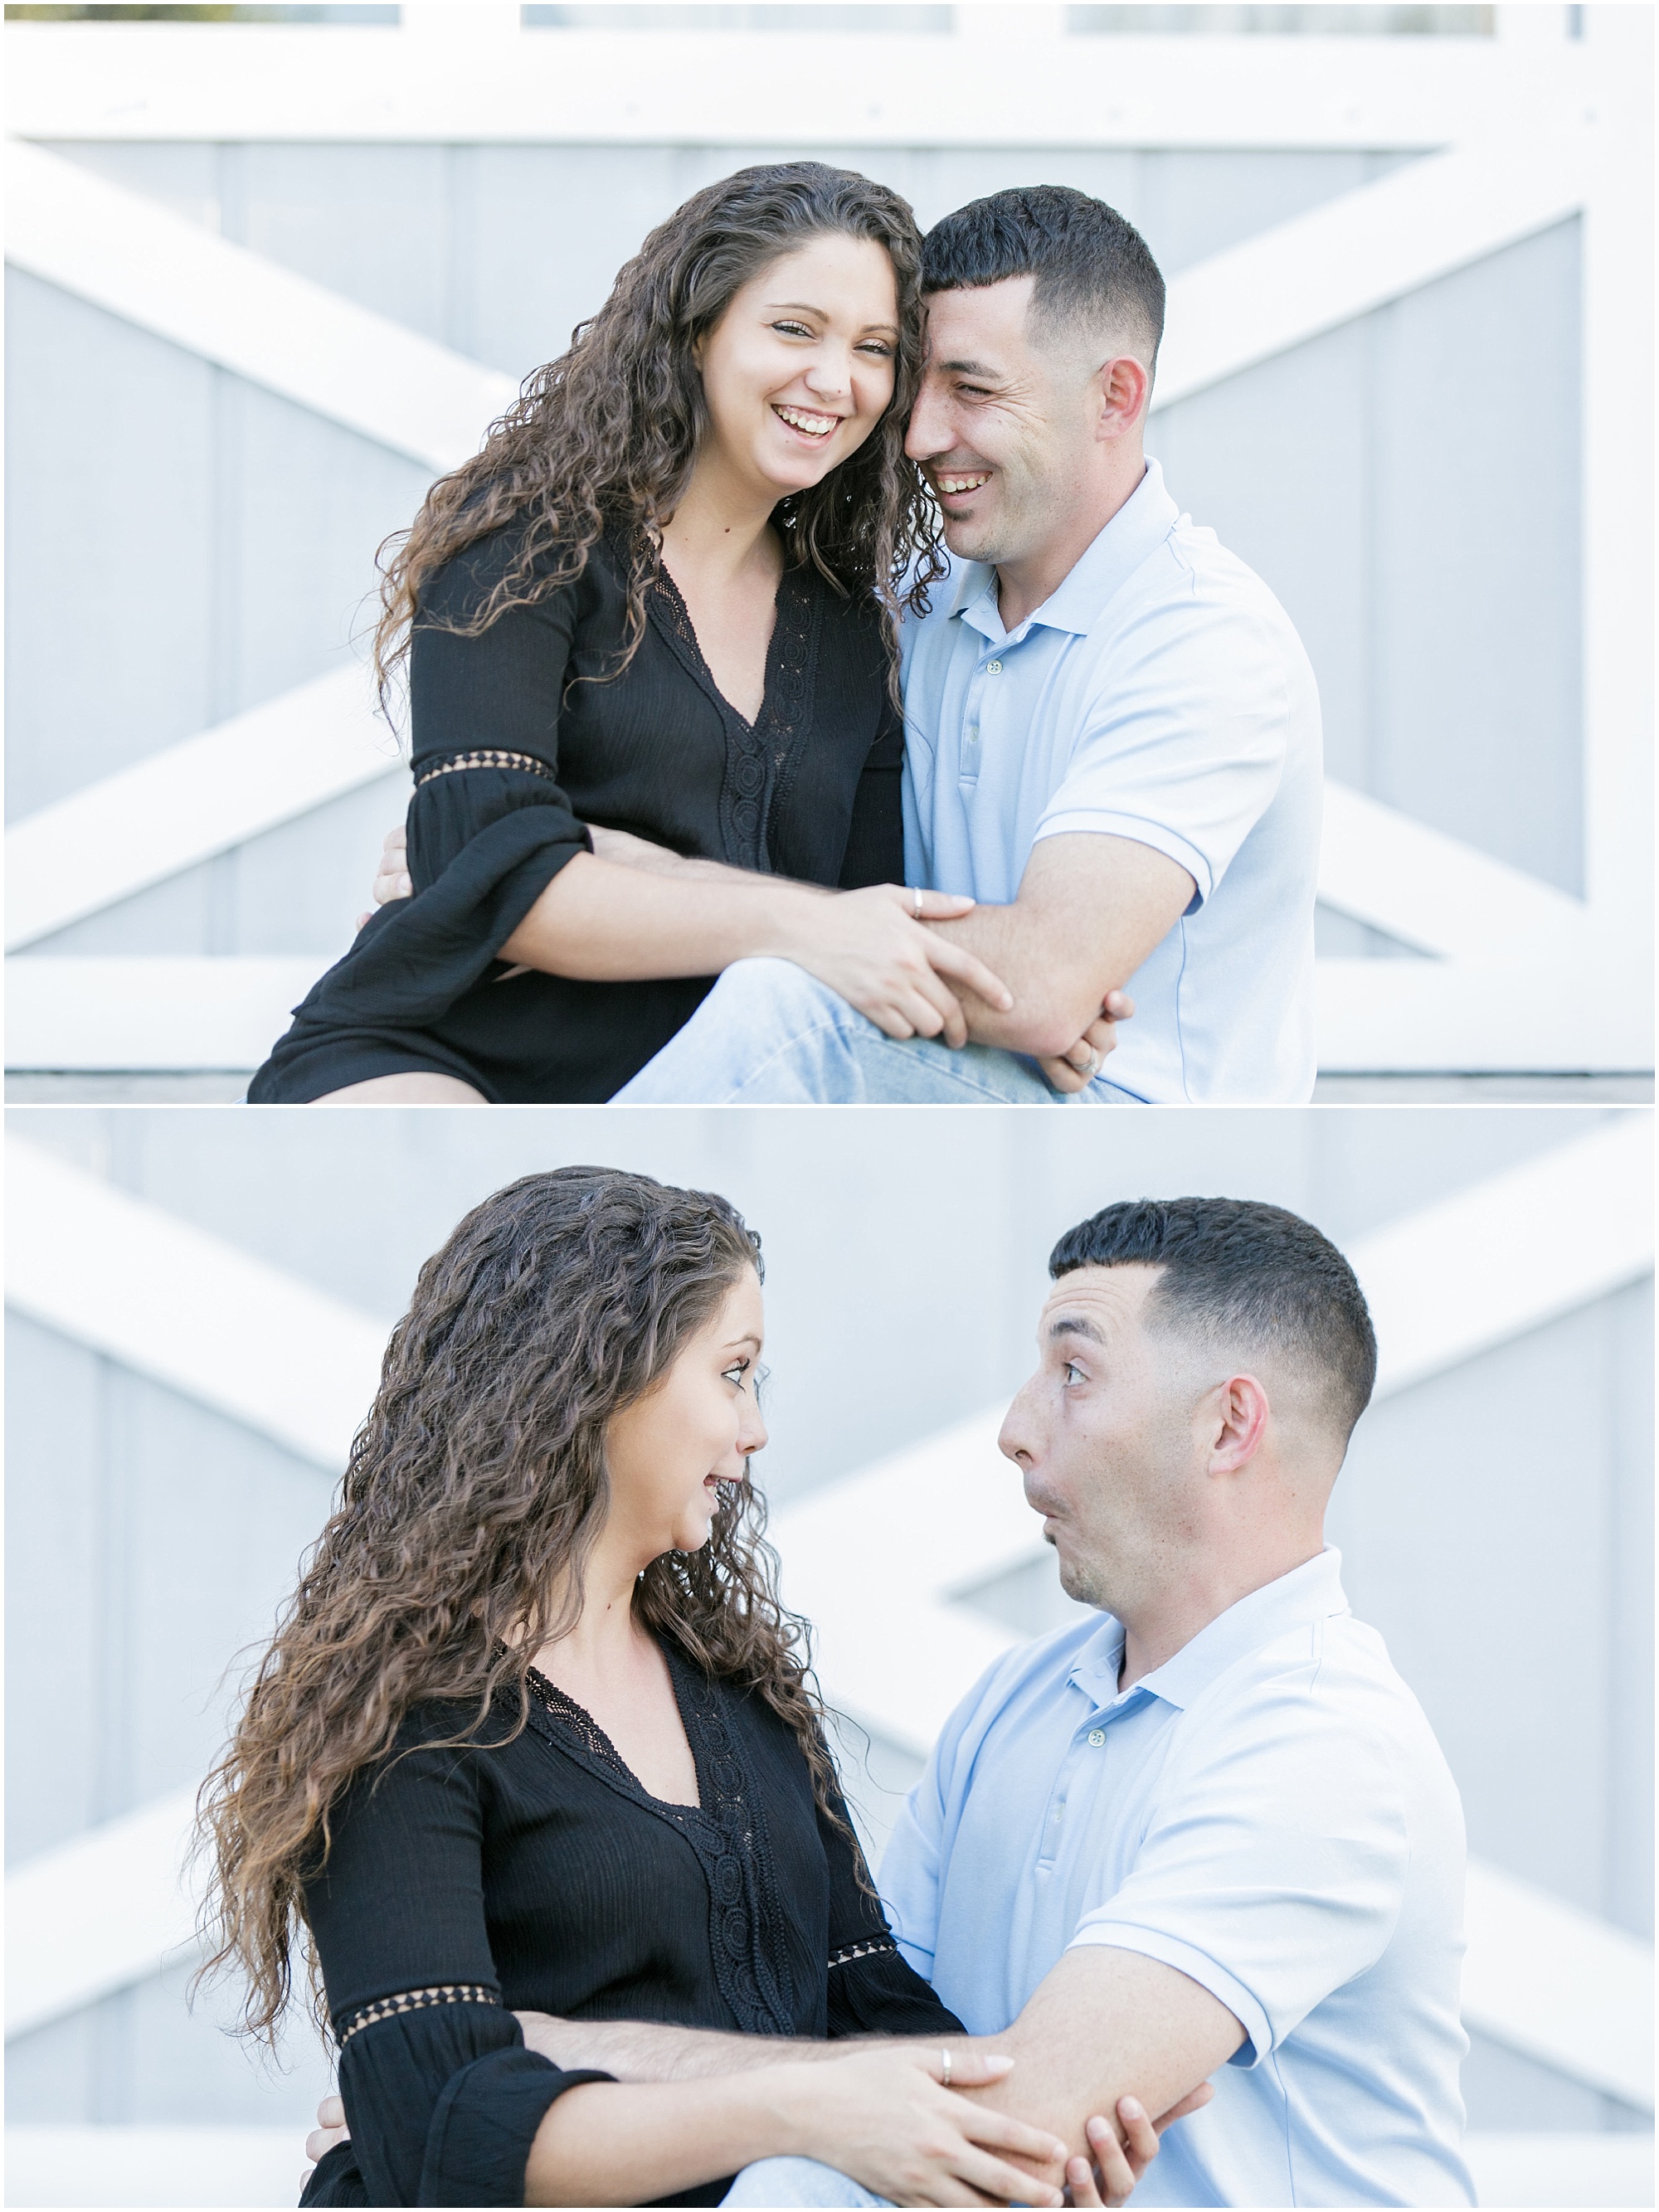 Couple laughing and making funny faces at each other.